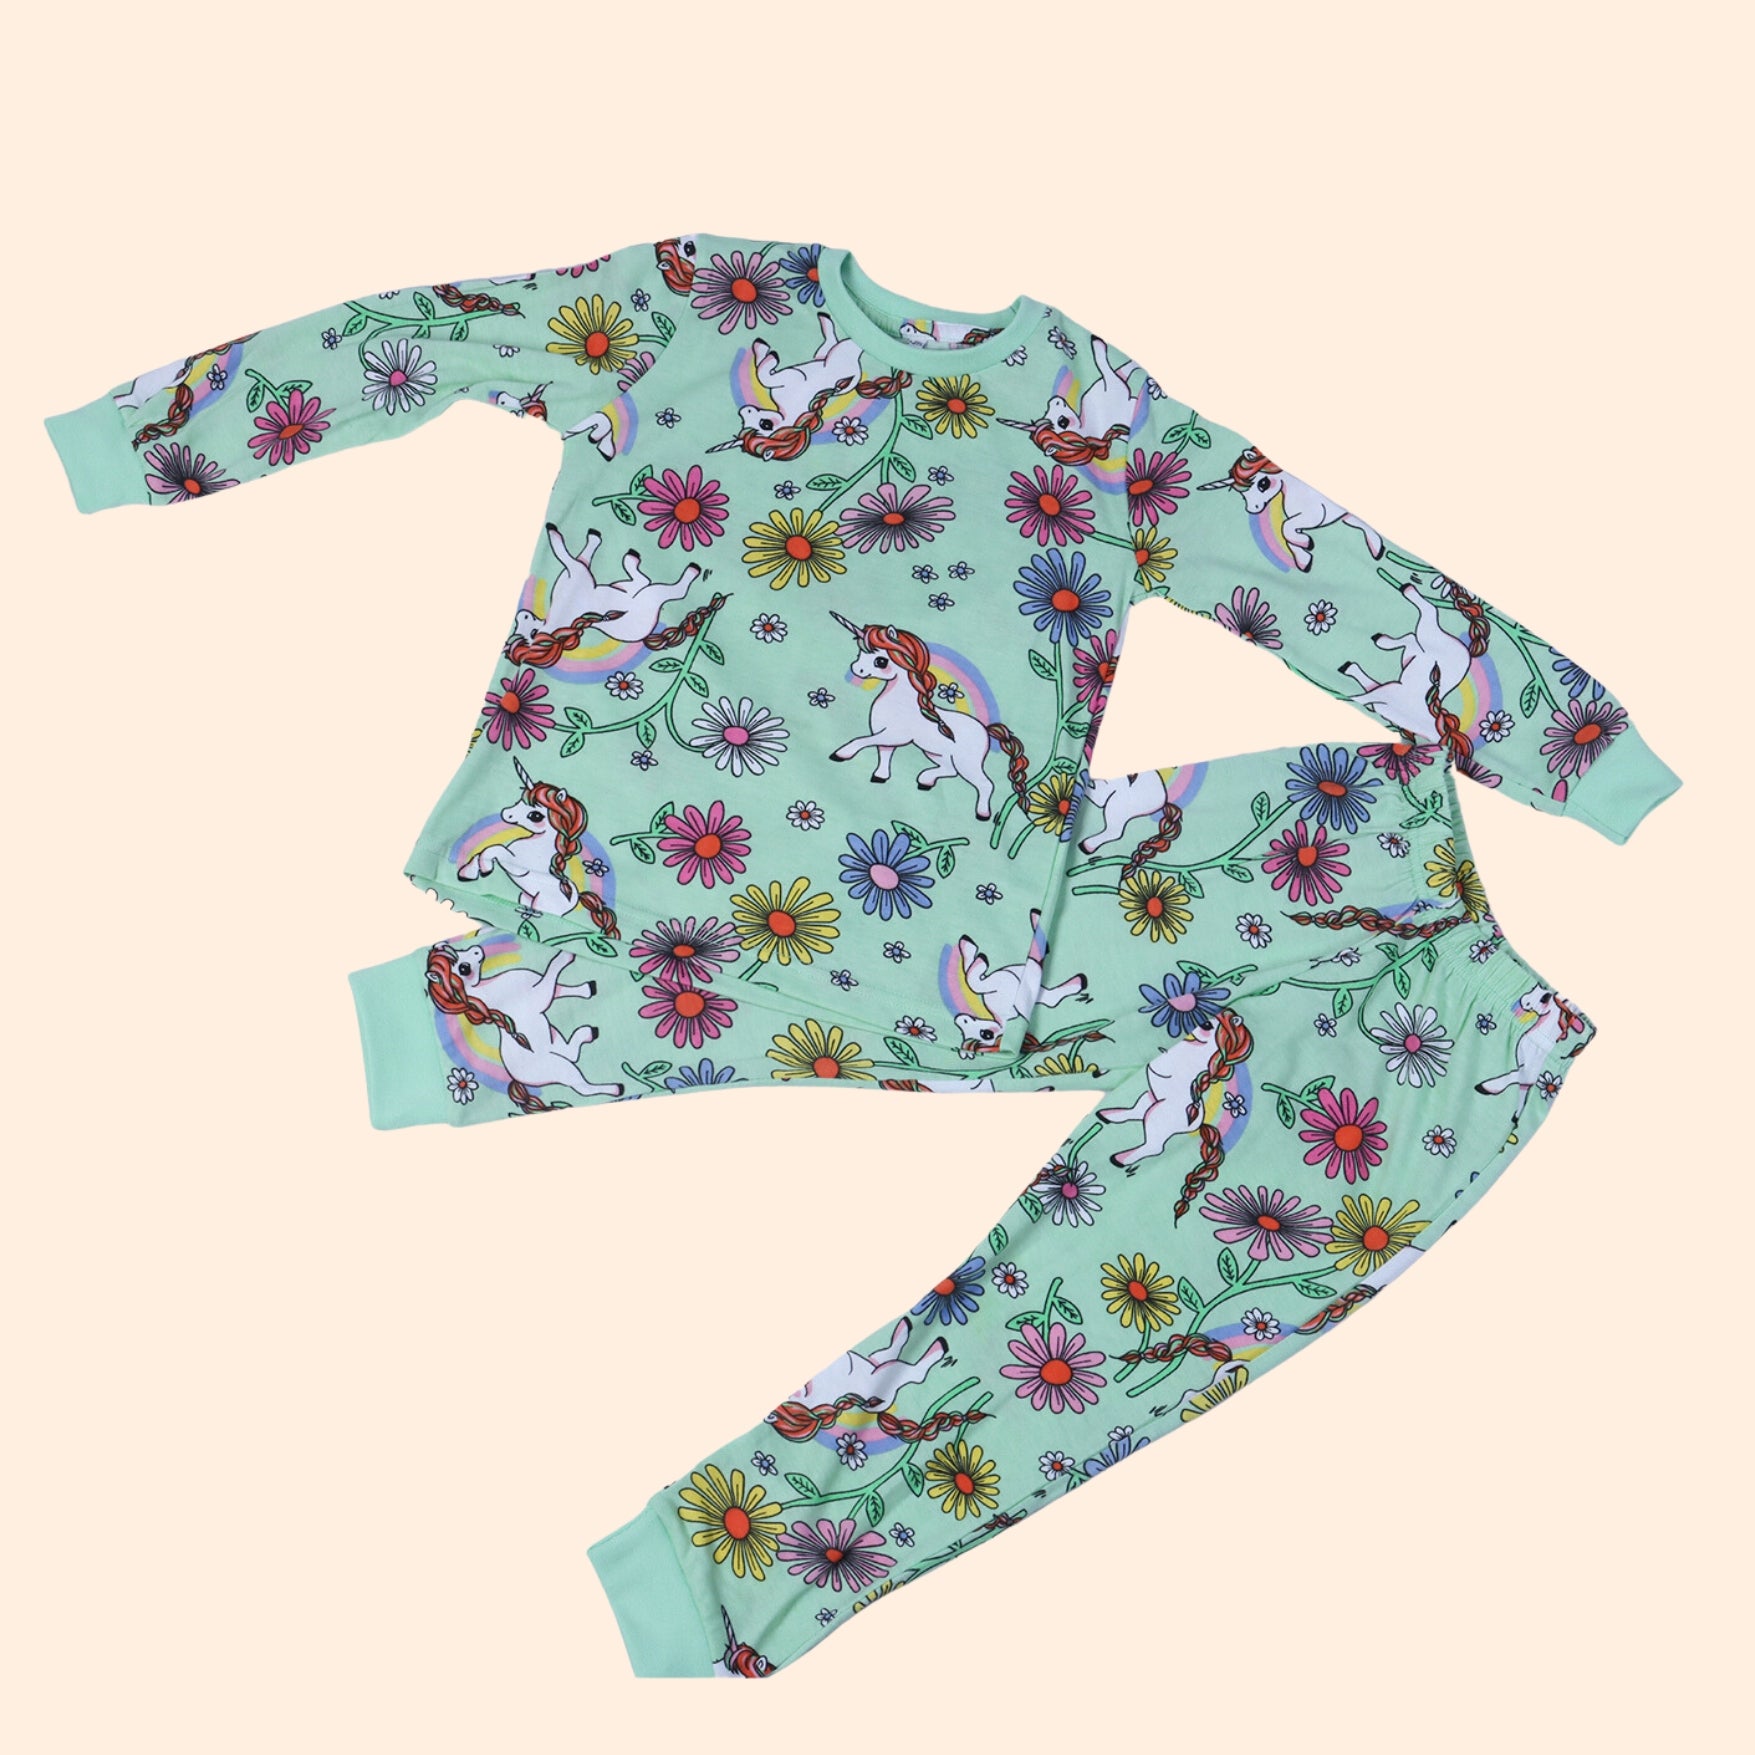 Full Sleeve Night Suit For Girl In Green Colour - Unicorn & Floral